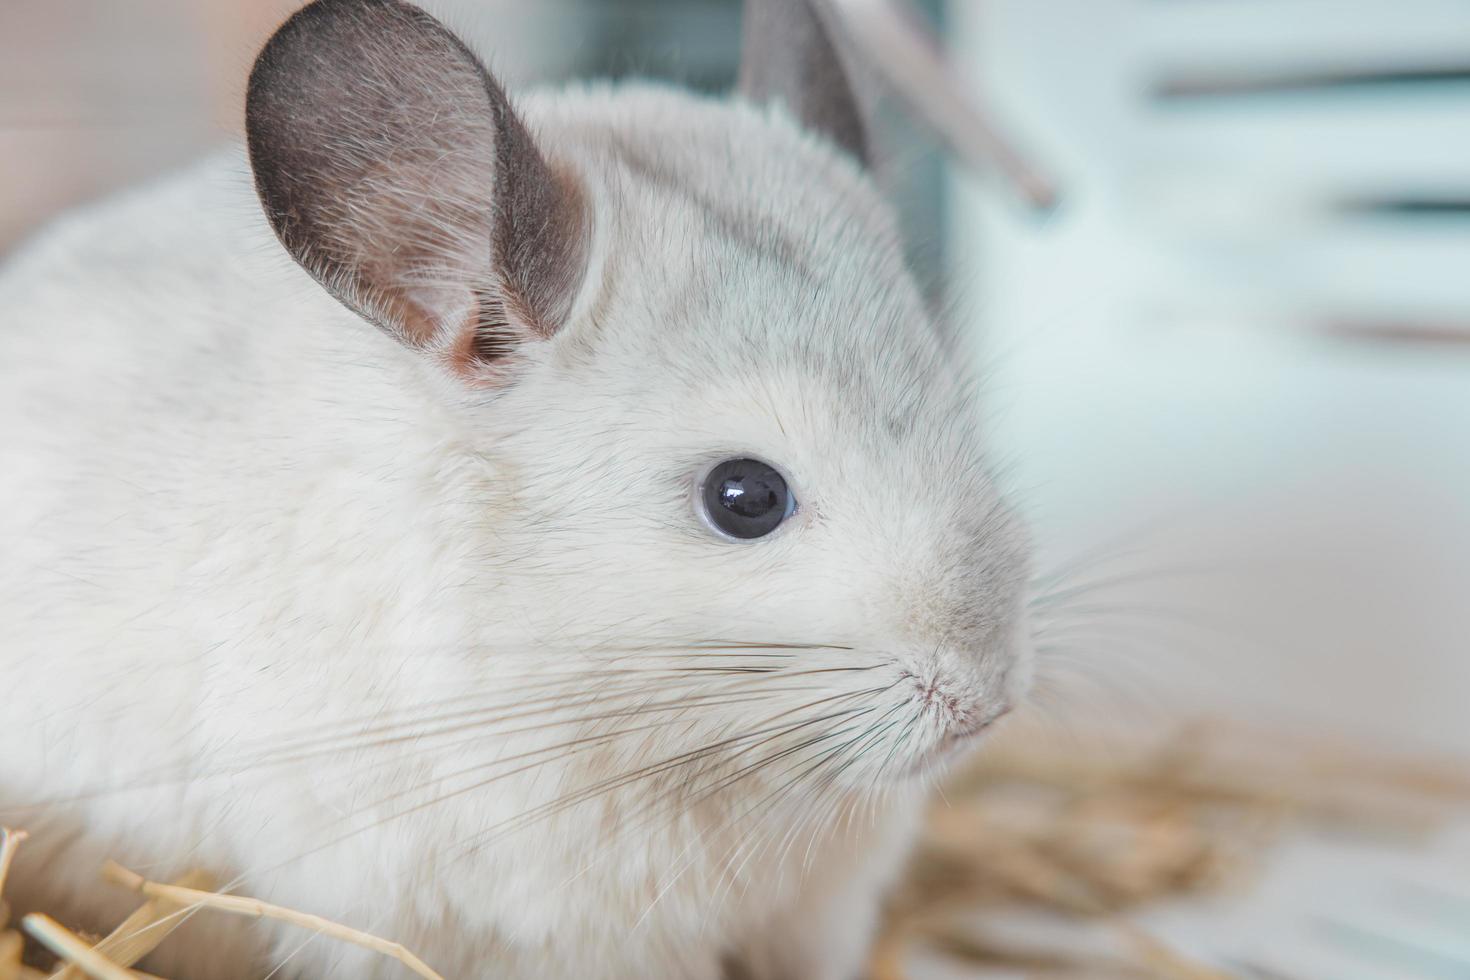 Chinchilla cute pet fur white hair fluffy and black eyes. Close-up animal rodent adorable tame ear grey looking at camera. Feline mammals are fluffy and playful. photo